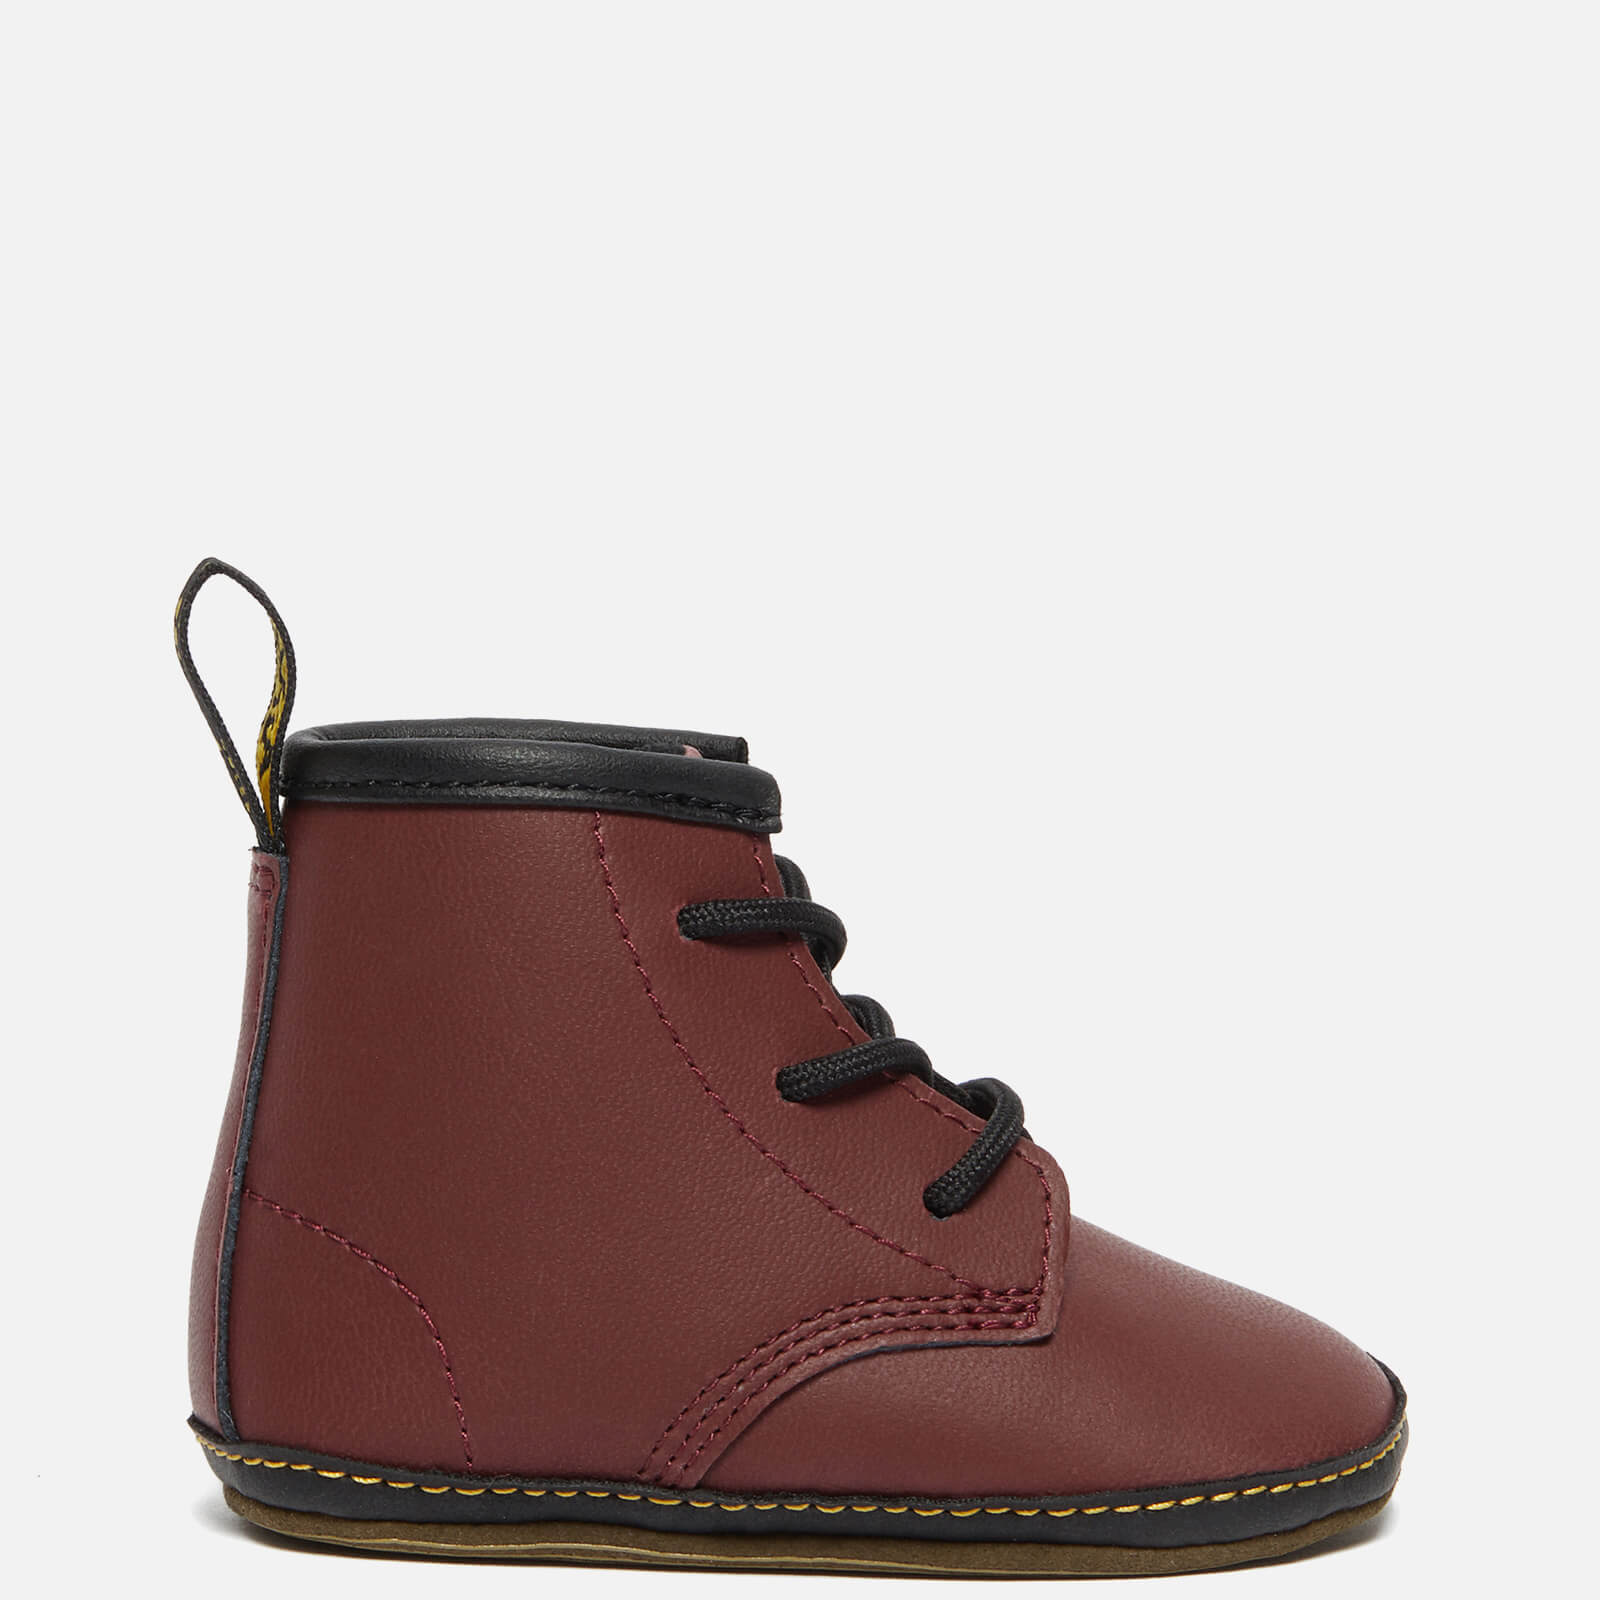 Dr. Martens Babies' 1460 Crib Lace Bootie - Cherry Red - UK 1 Baby